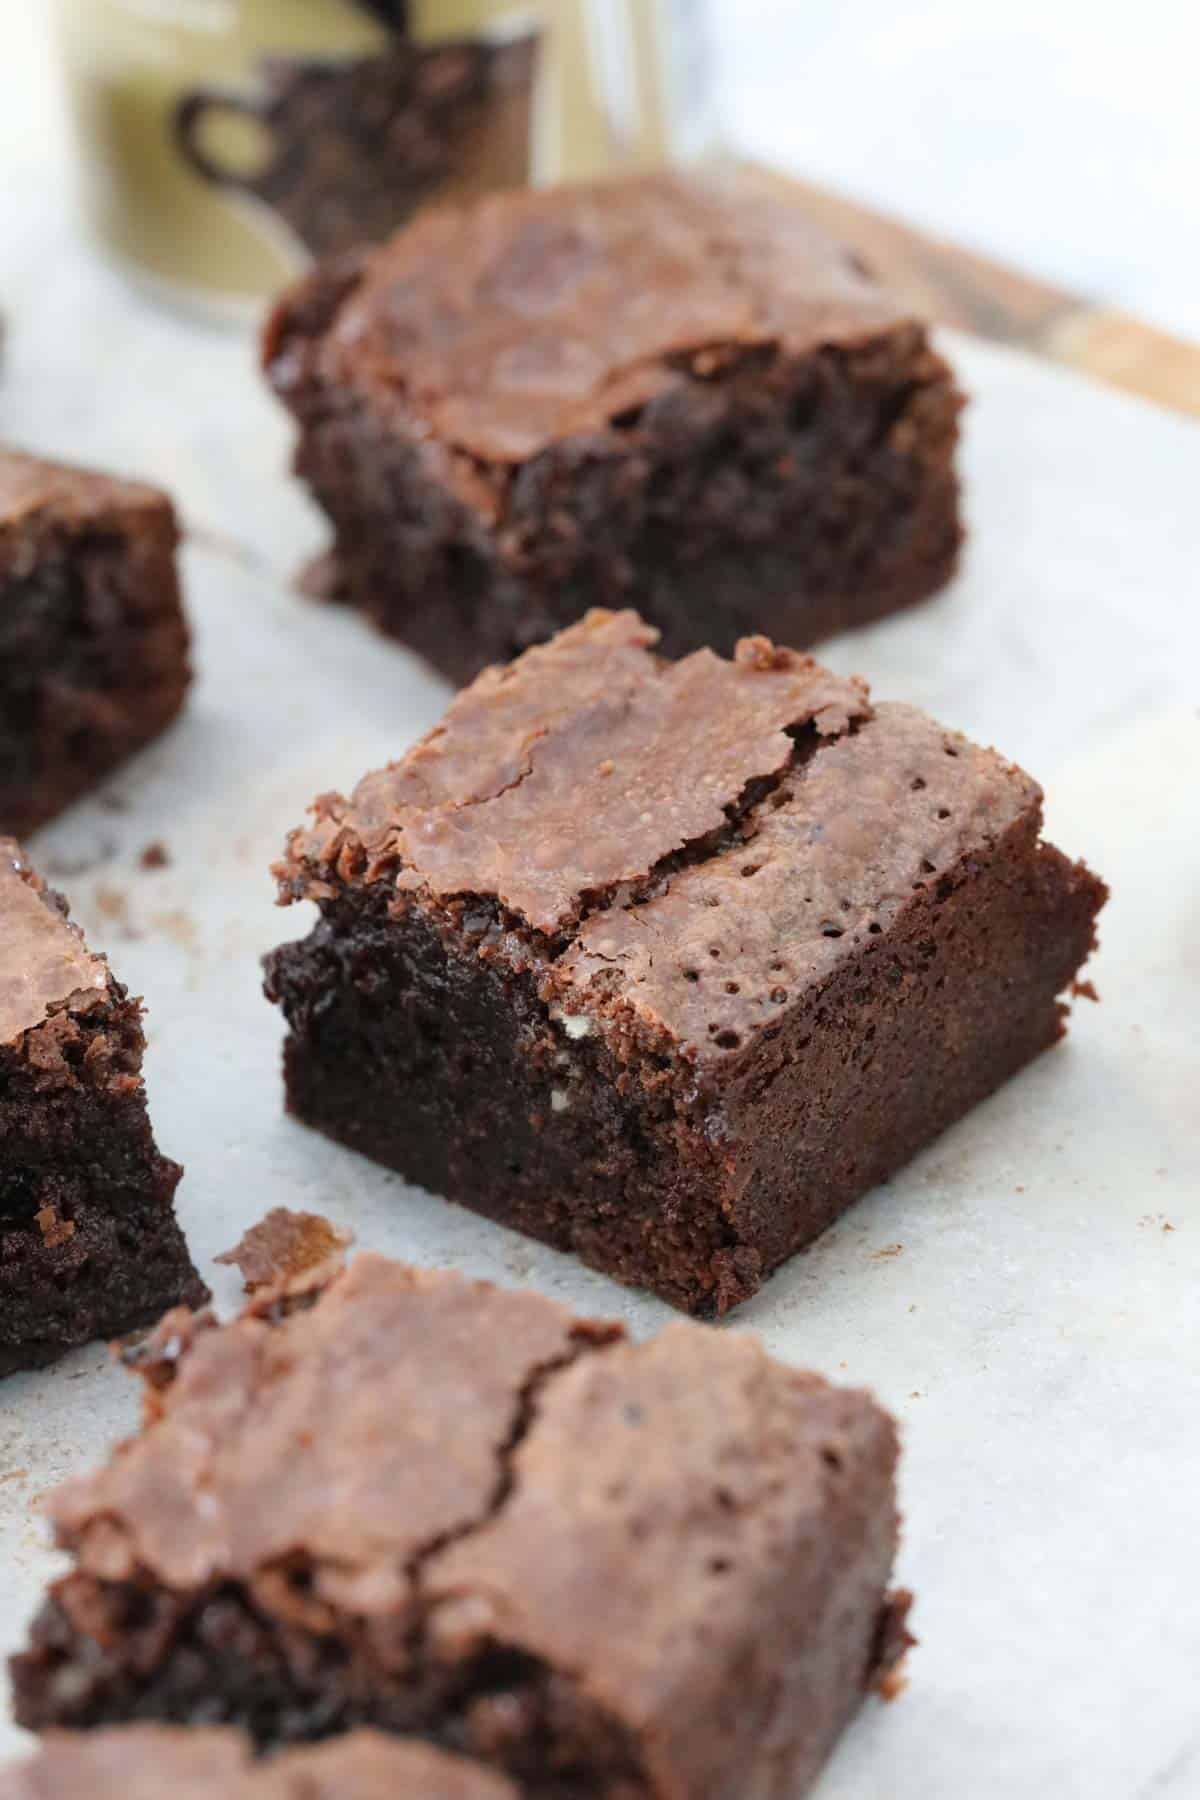 Squares of a fudgy brownie, placed on baking paper.